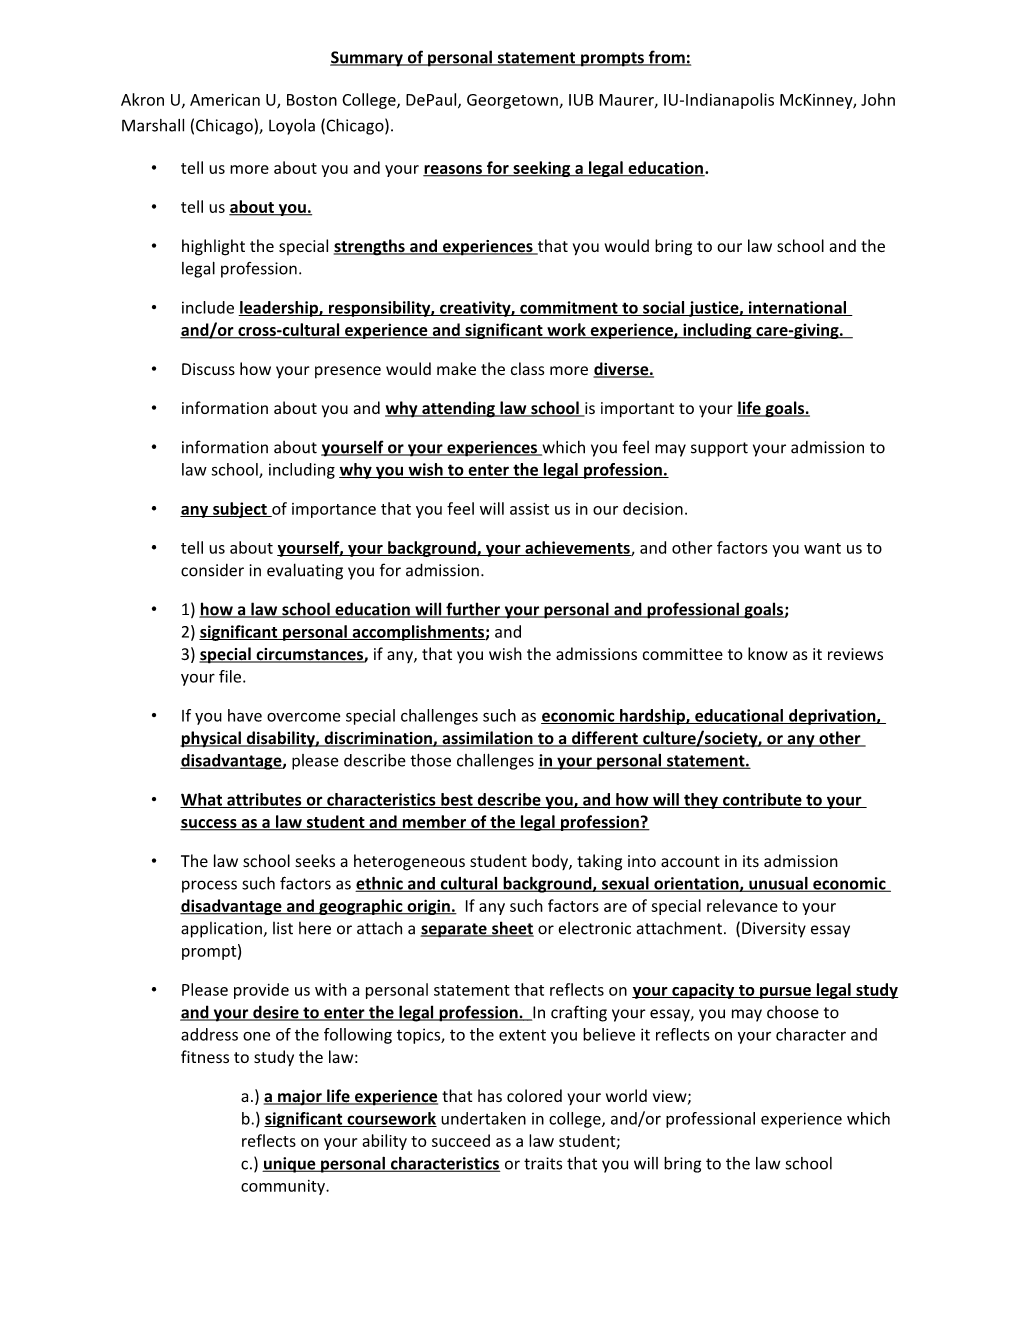 Summary of Personal Statement Prompts From